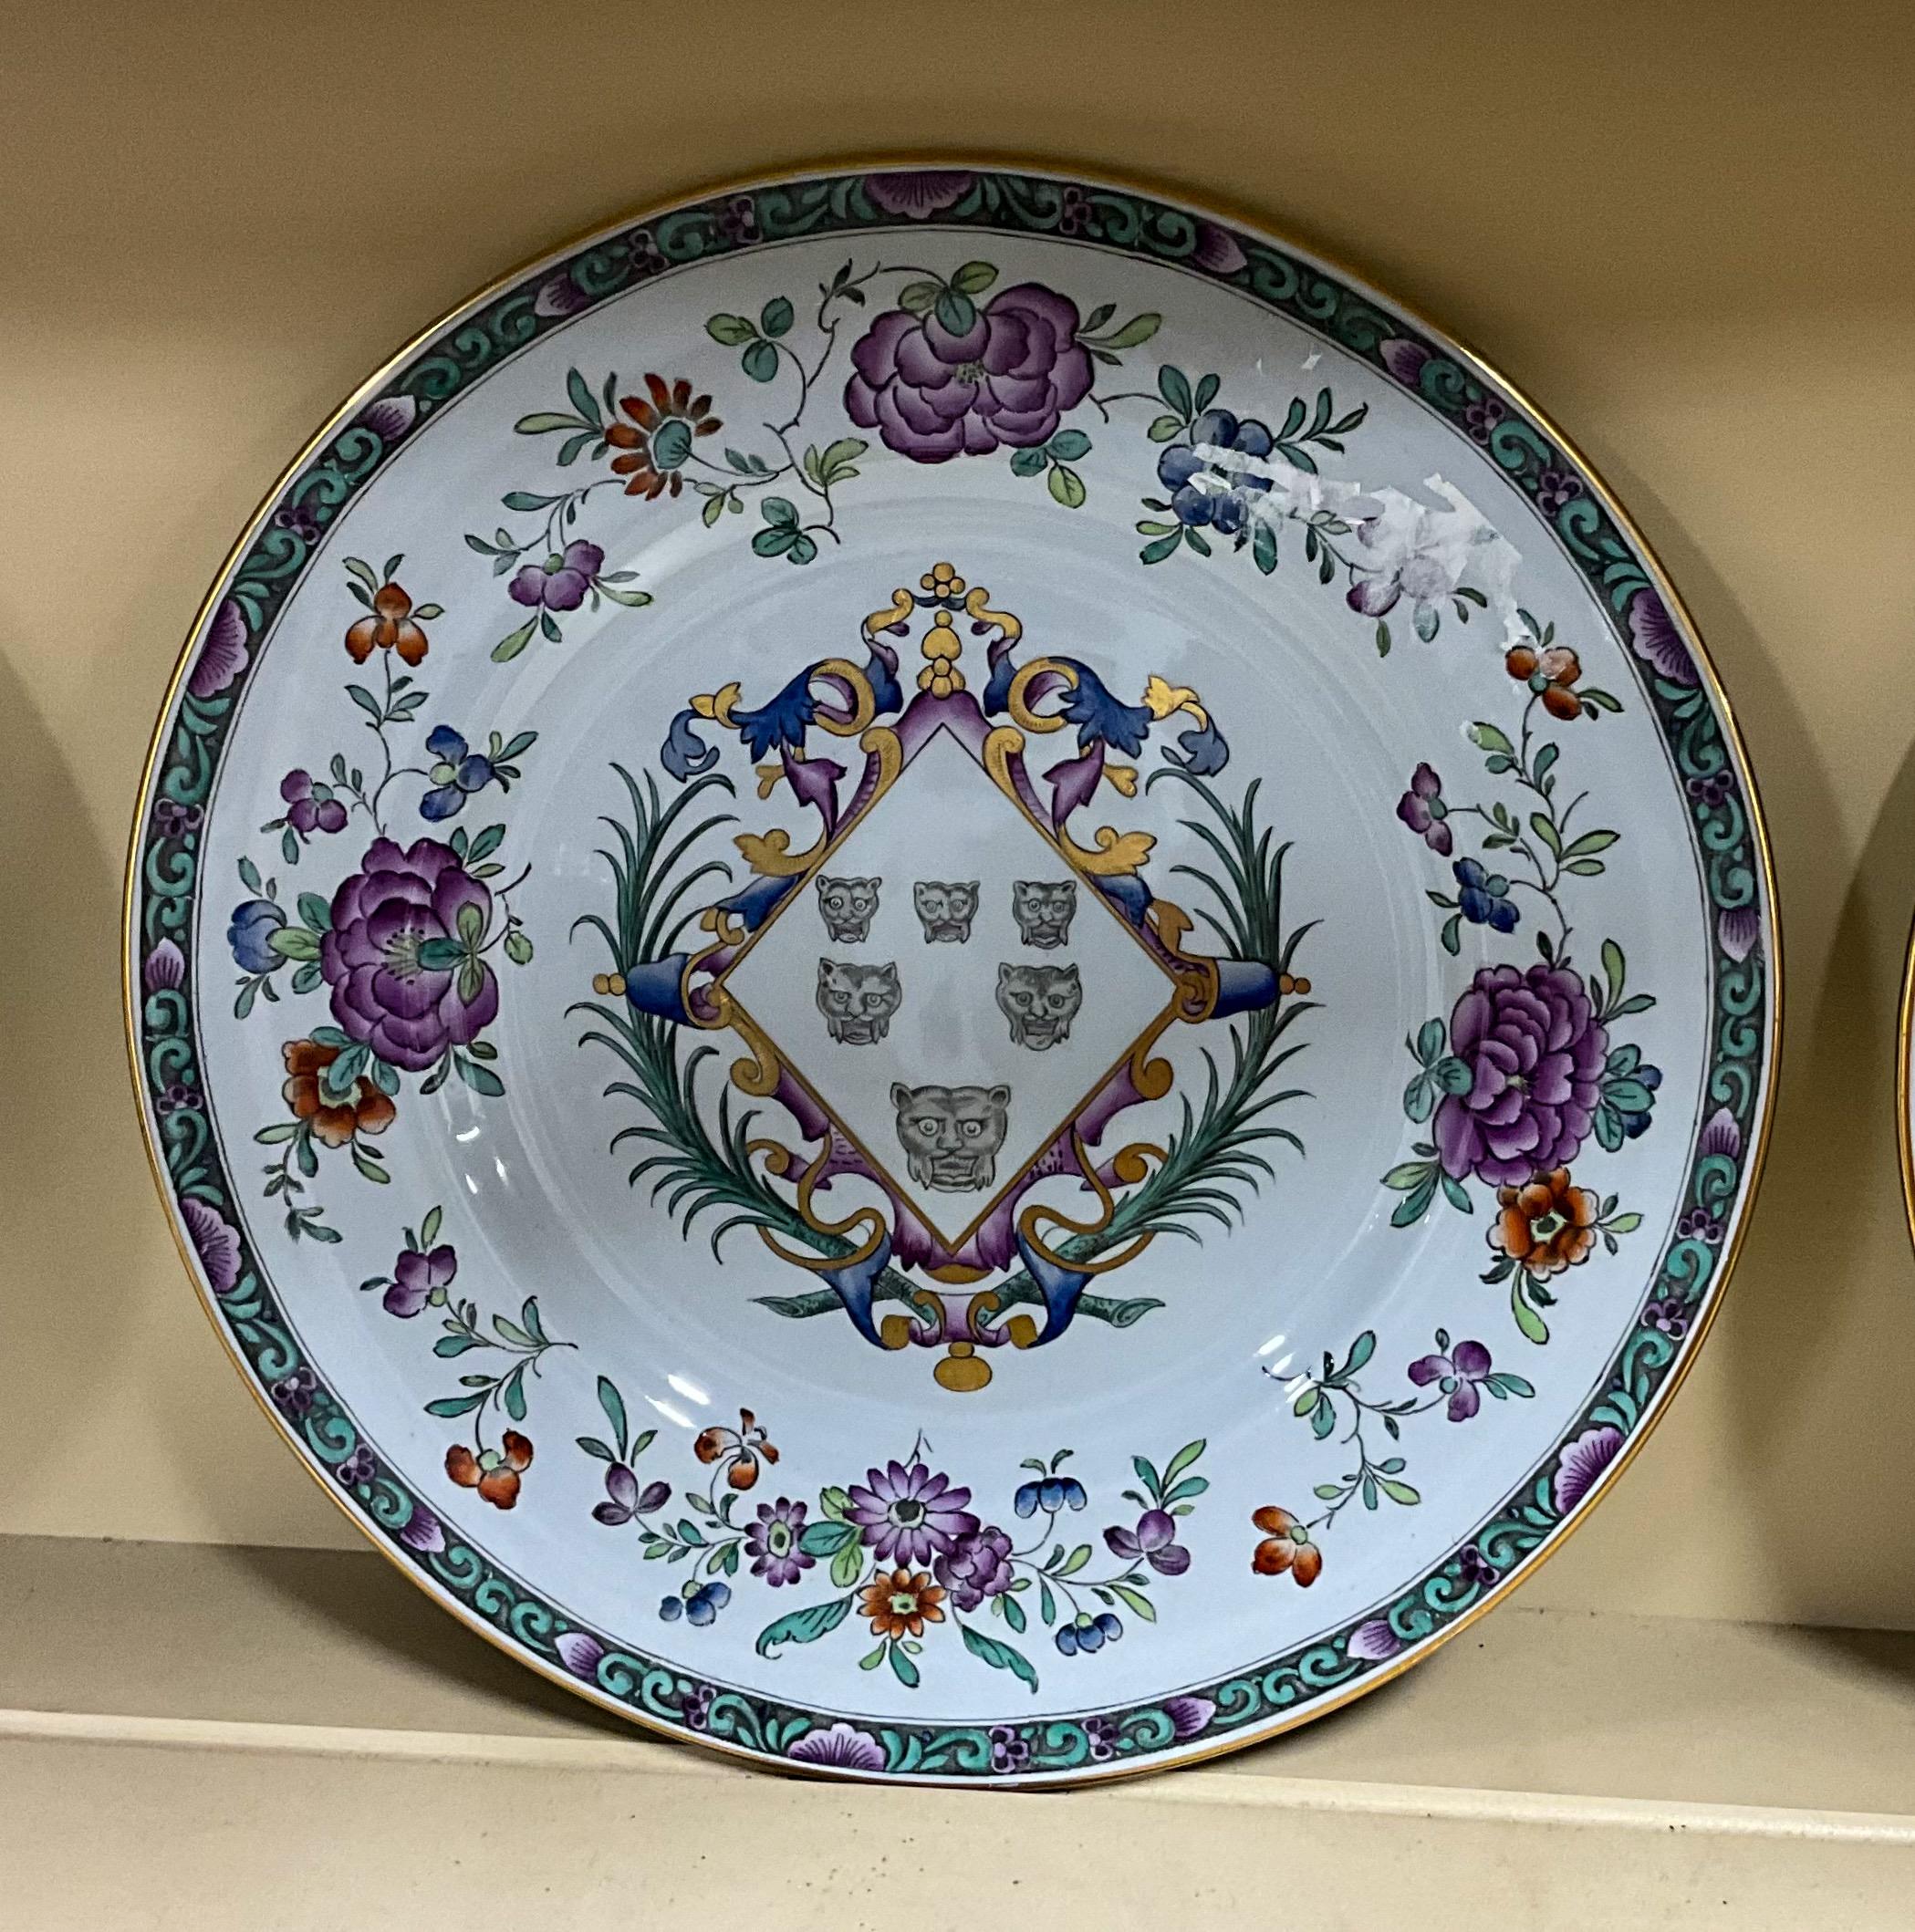 This is a lovely set of plates manufactured in England exclusively for Tiffany & Co, New York. They are marked and in very good condition. Perfect in a cabinet, or on a wall, or on a holiday table.